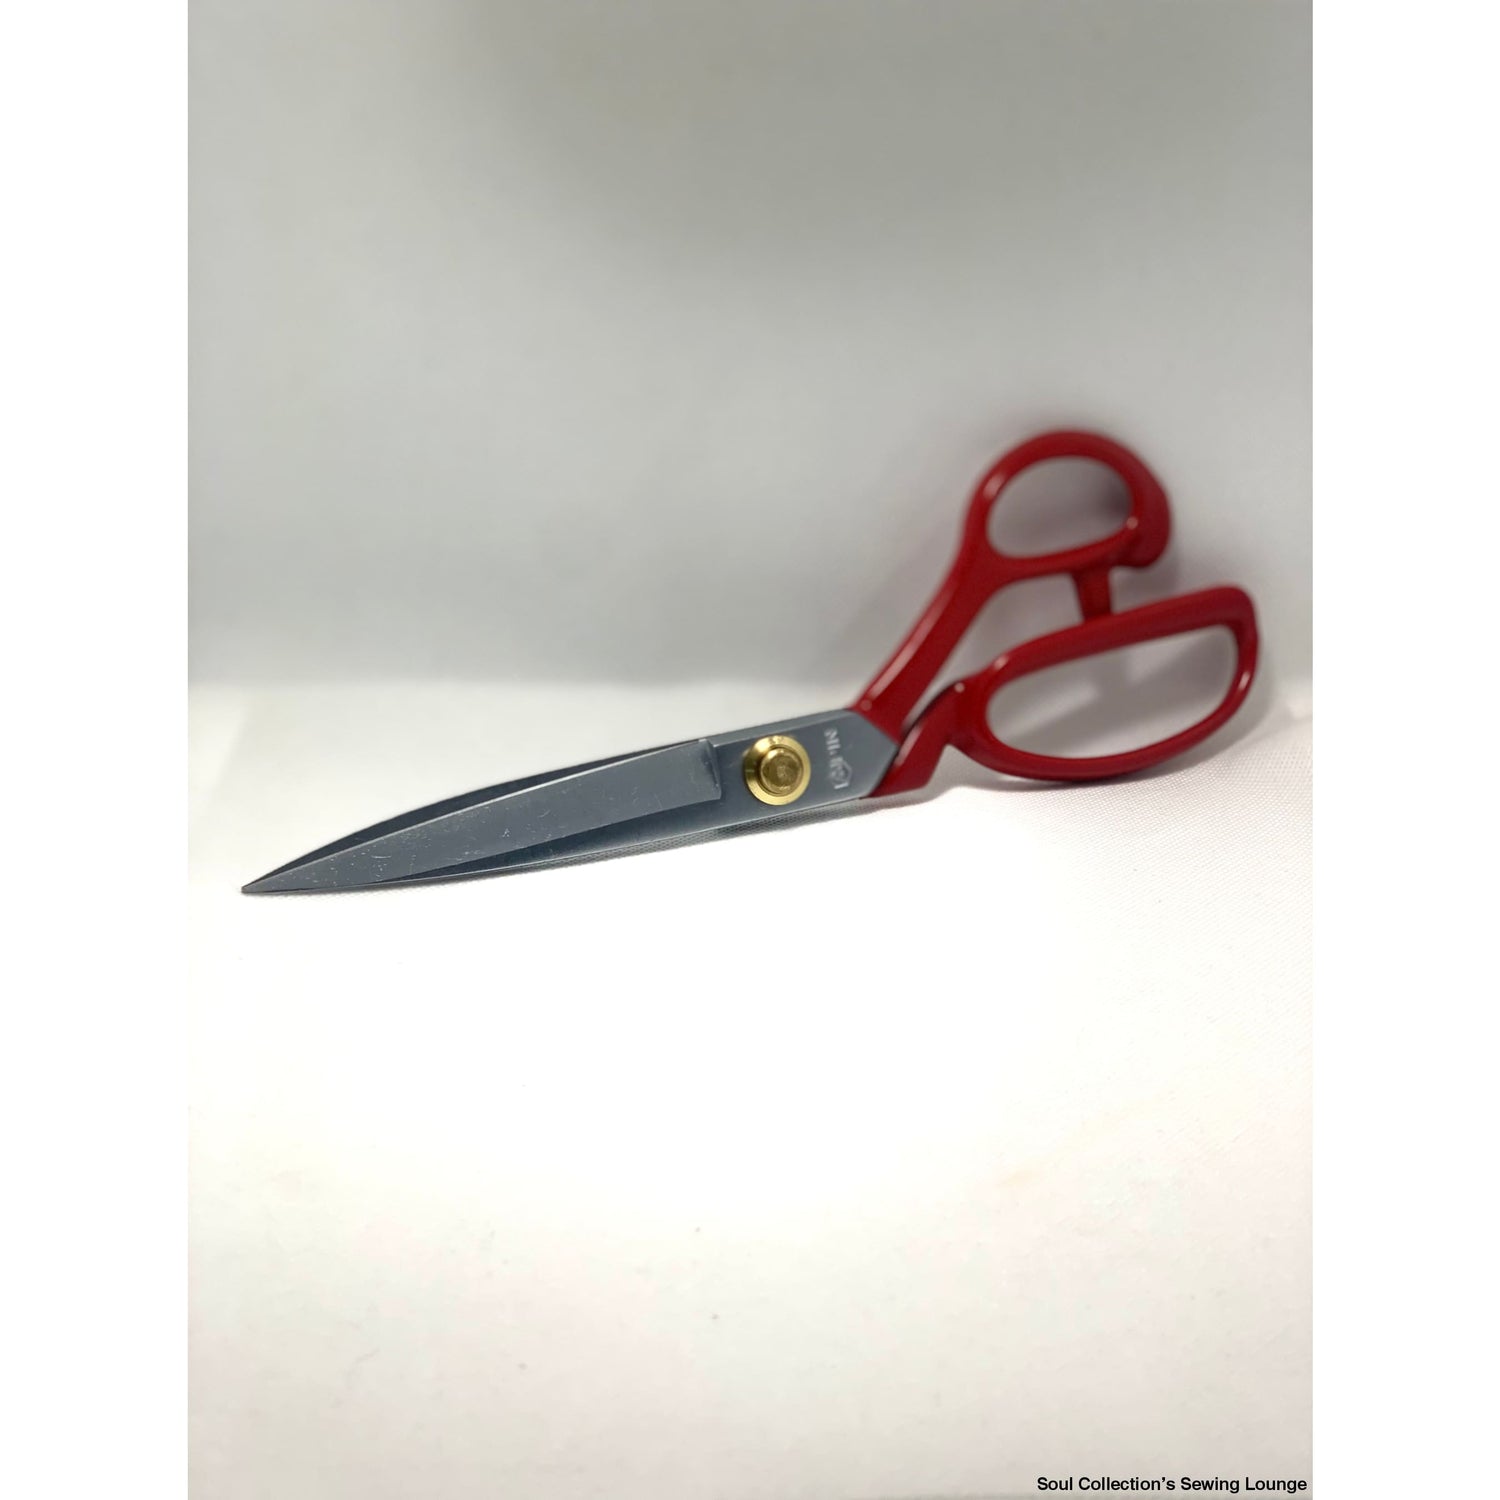 Soul Collection's Sewing Lounge - Red Handle Fabric Shears